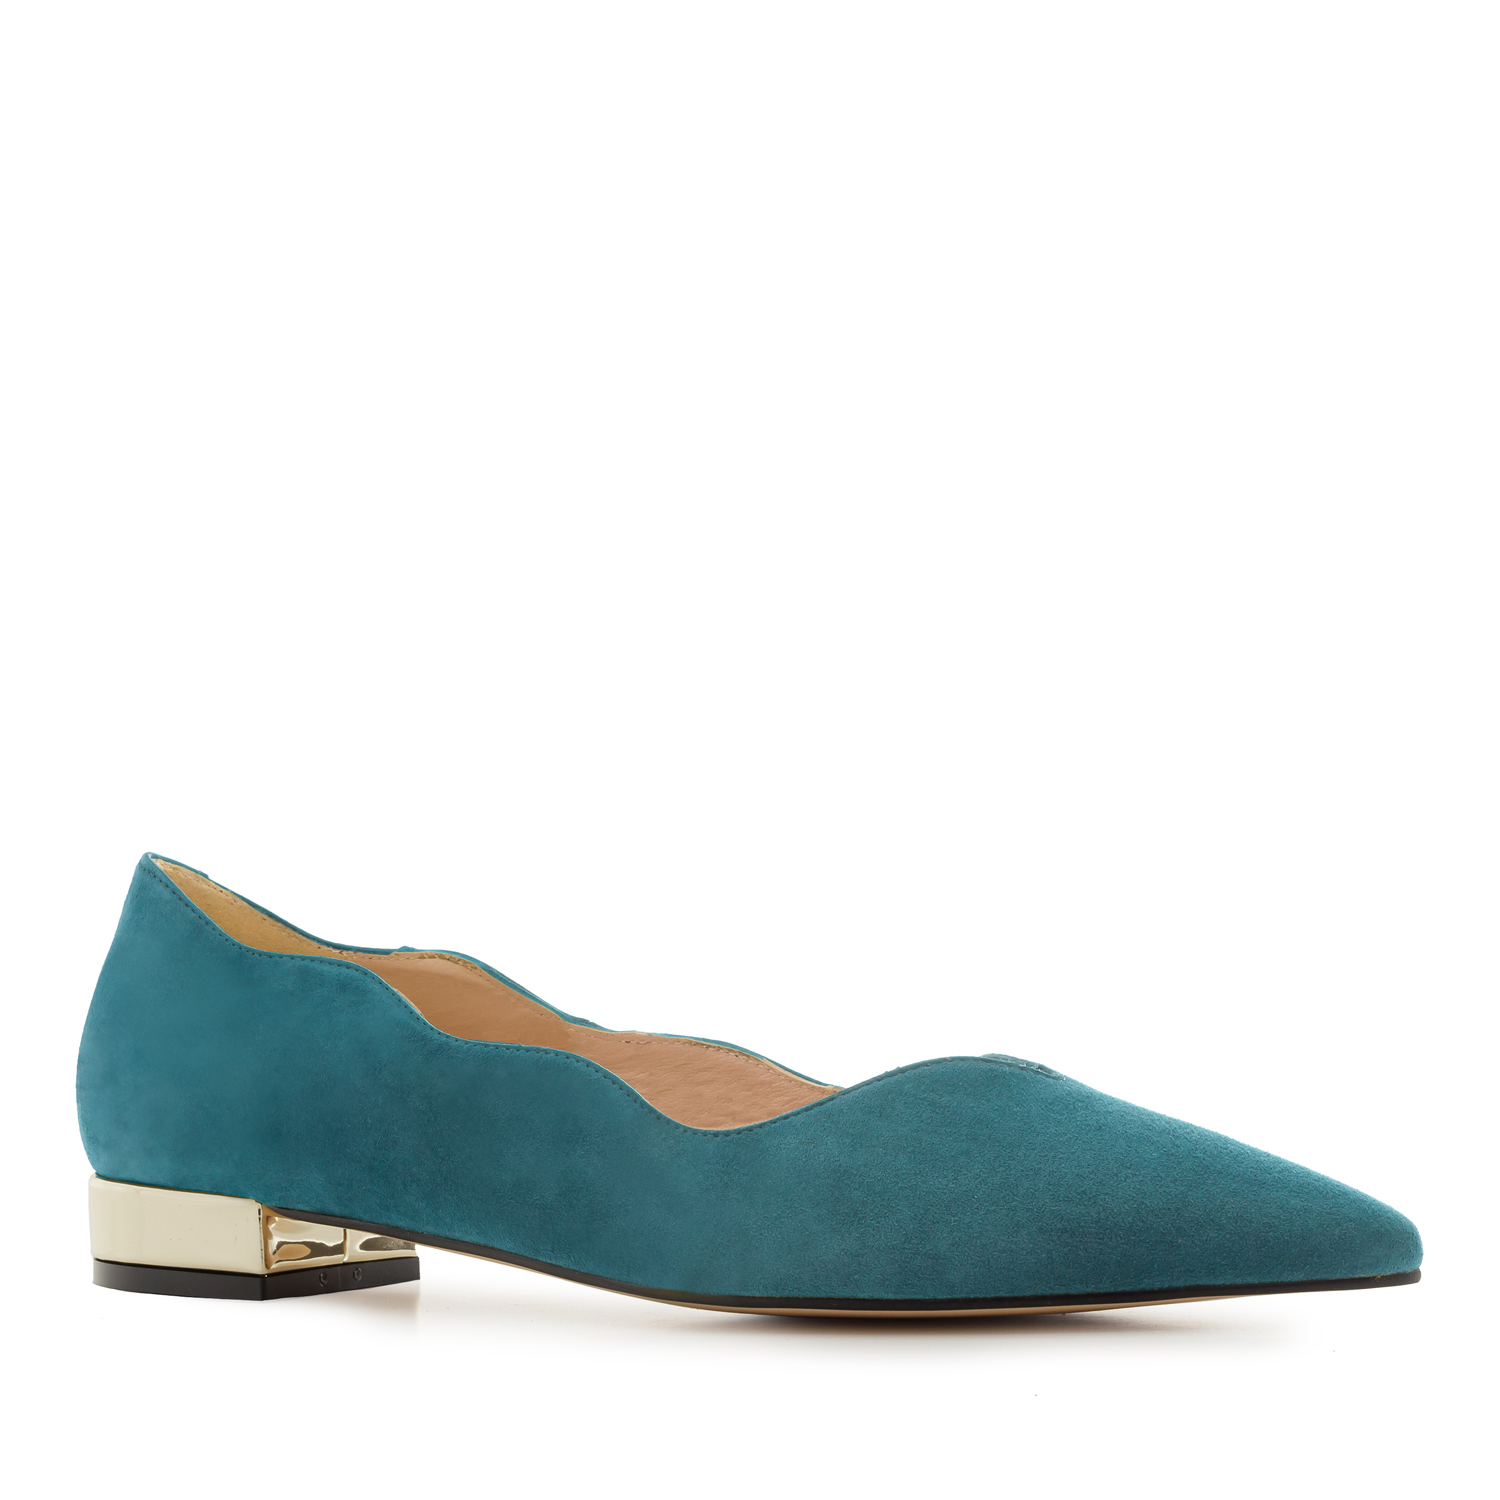 Waved Upper Ballet Flats in Blue Nappa Leather 